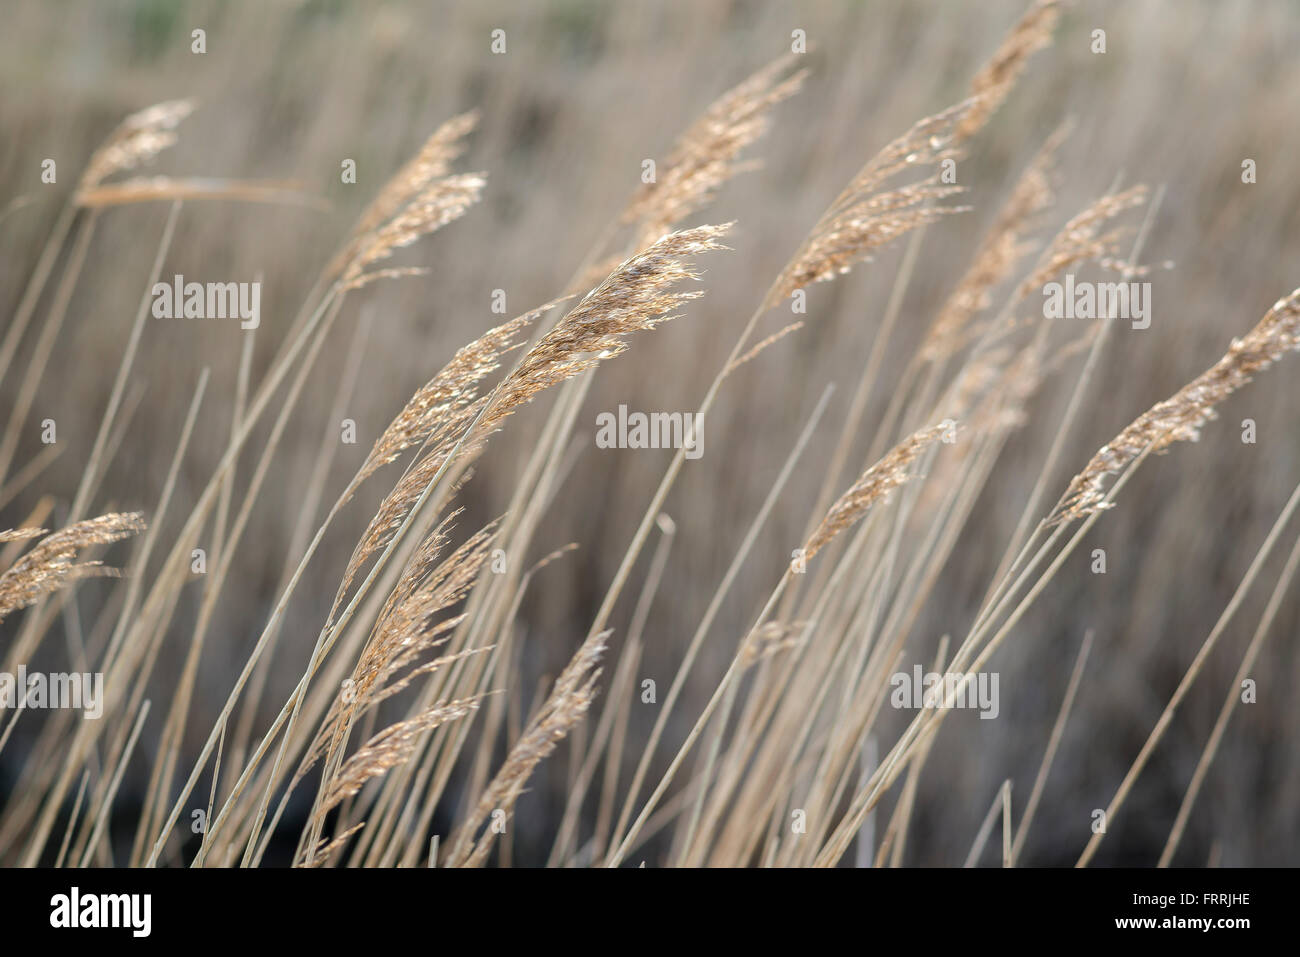 Reeds reed marsh, view of reeds in a marsh bed near Orford in Suffolk, England. Stock Photo